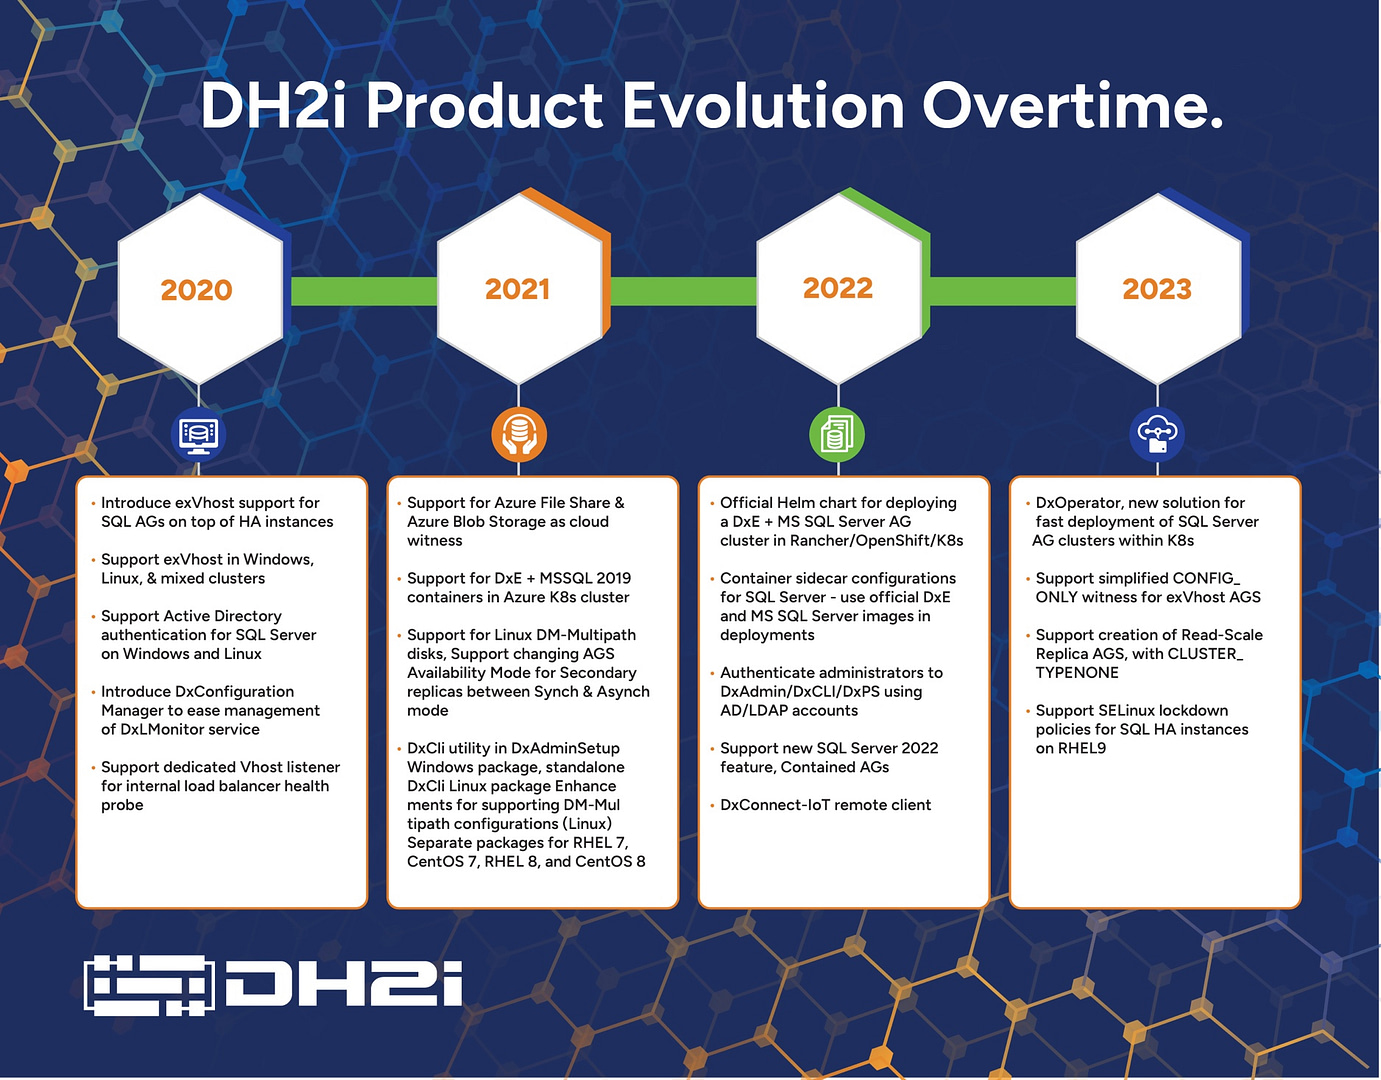 Check out this timeline of DH2i's timely SQL Server innovations with our Smart High Availability Clustering technology.